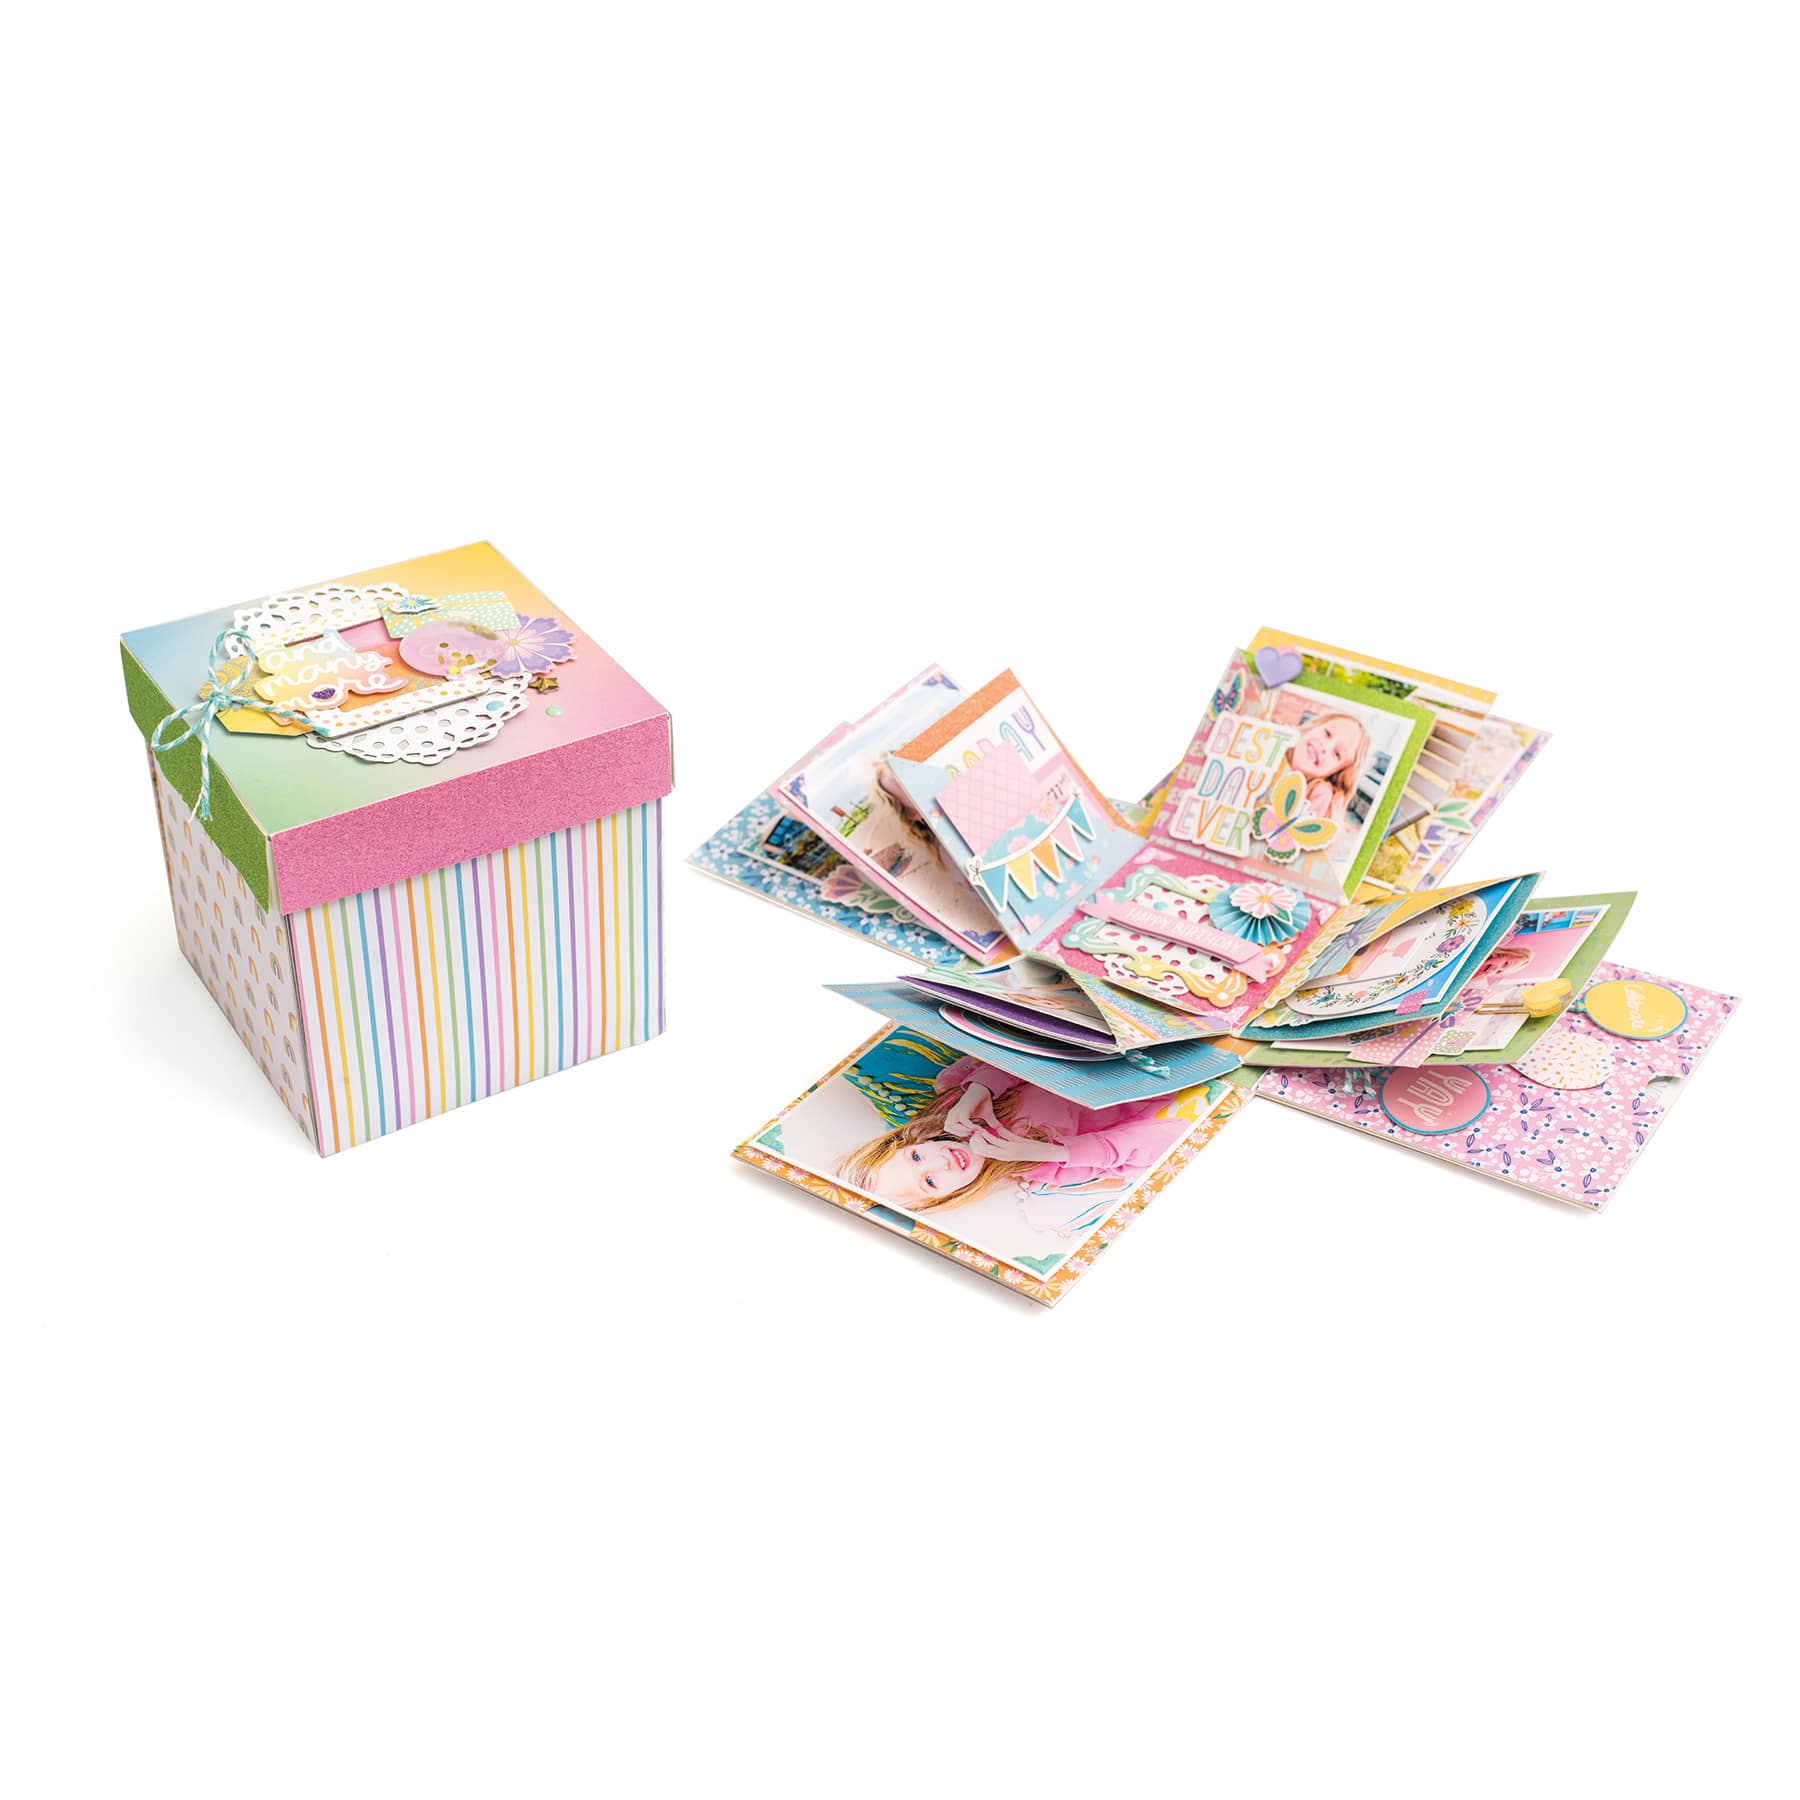 12 Pack: 5&#x22; Kraft Memory Explosion Box by Recollections&#x2122;